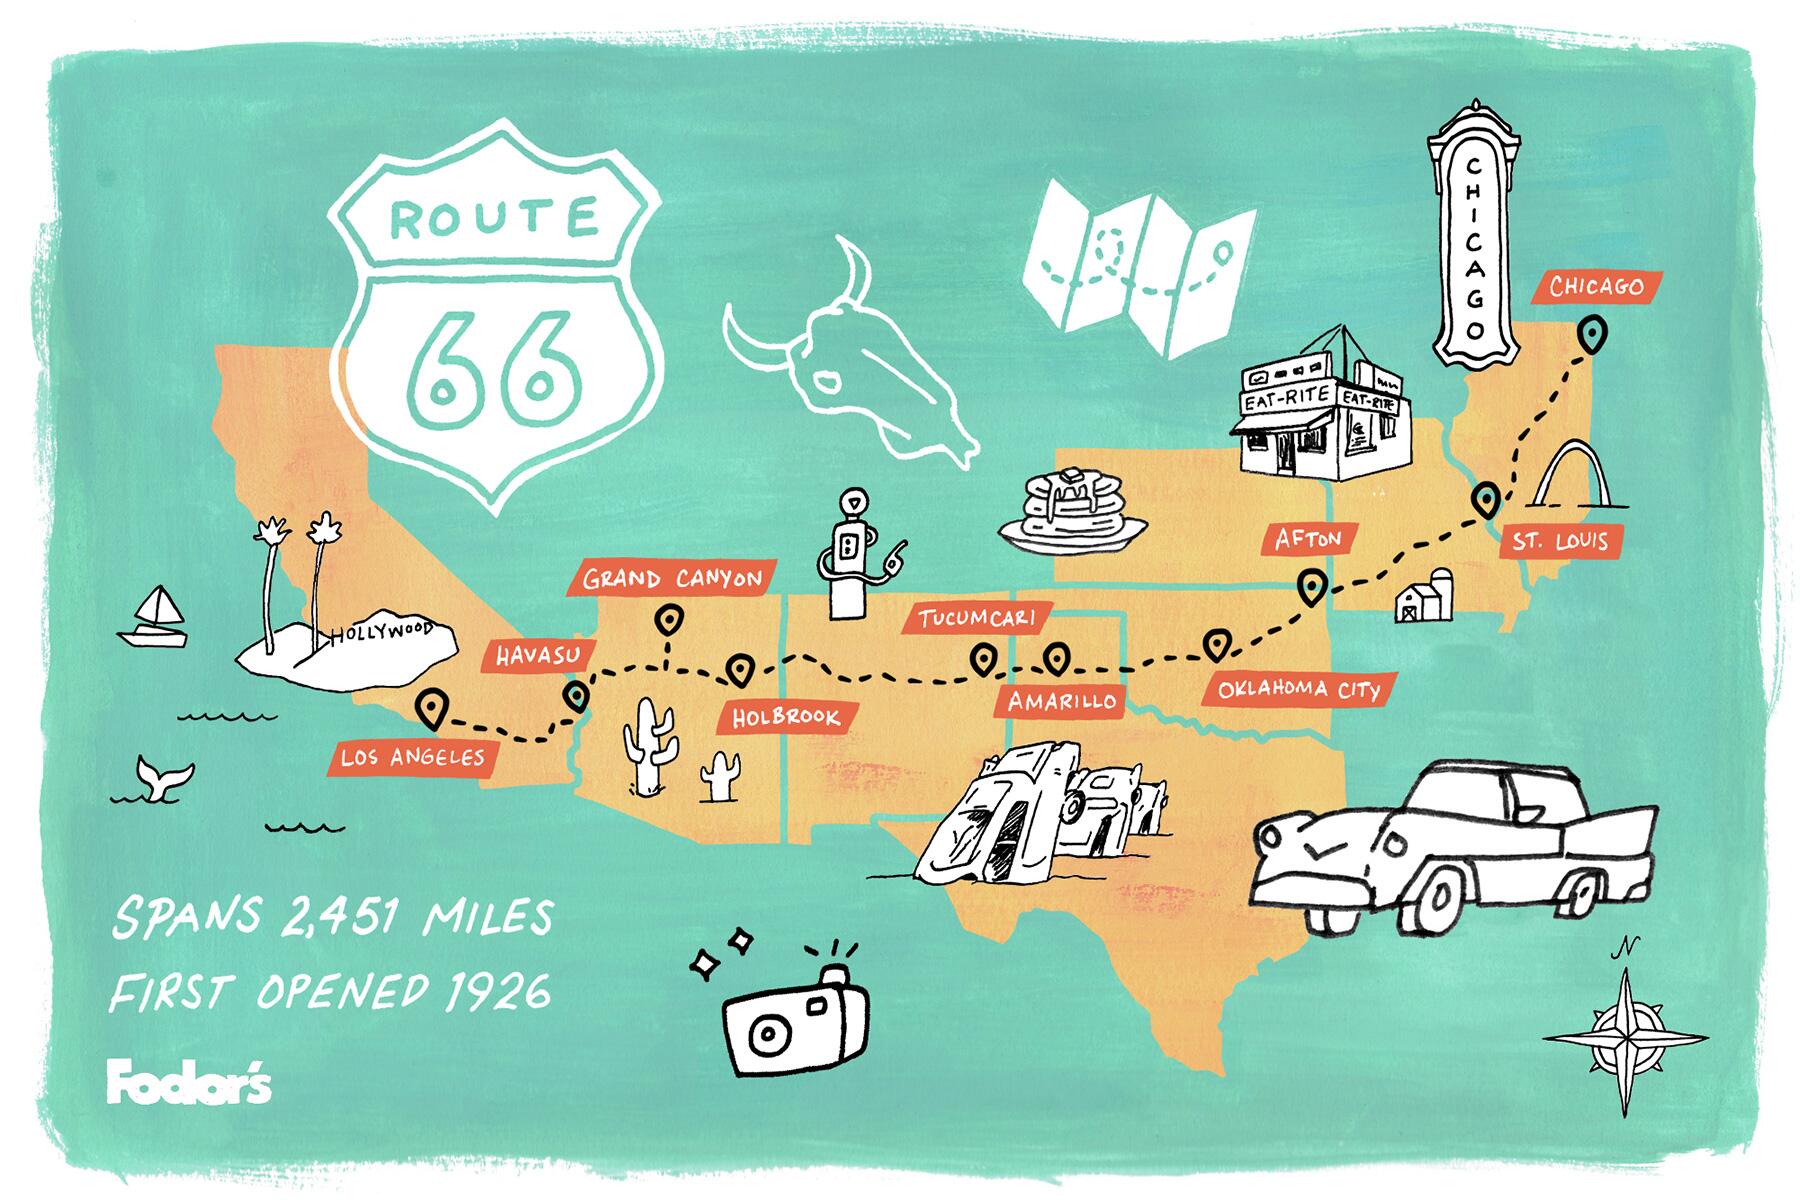 leje Meget sur hul Road Trip Itinerary: Route 66 From Los Angeles to Chicago and Back Again